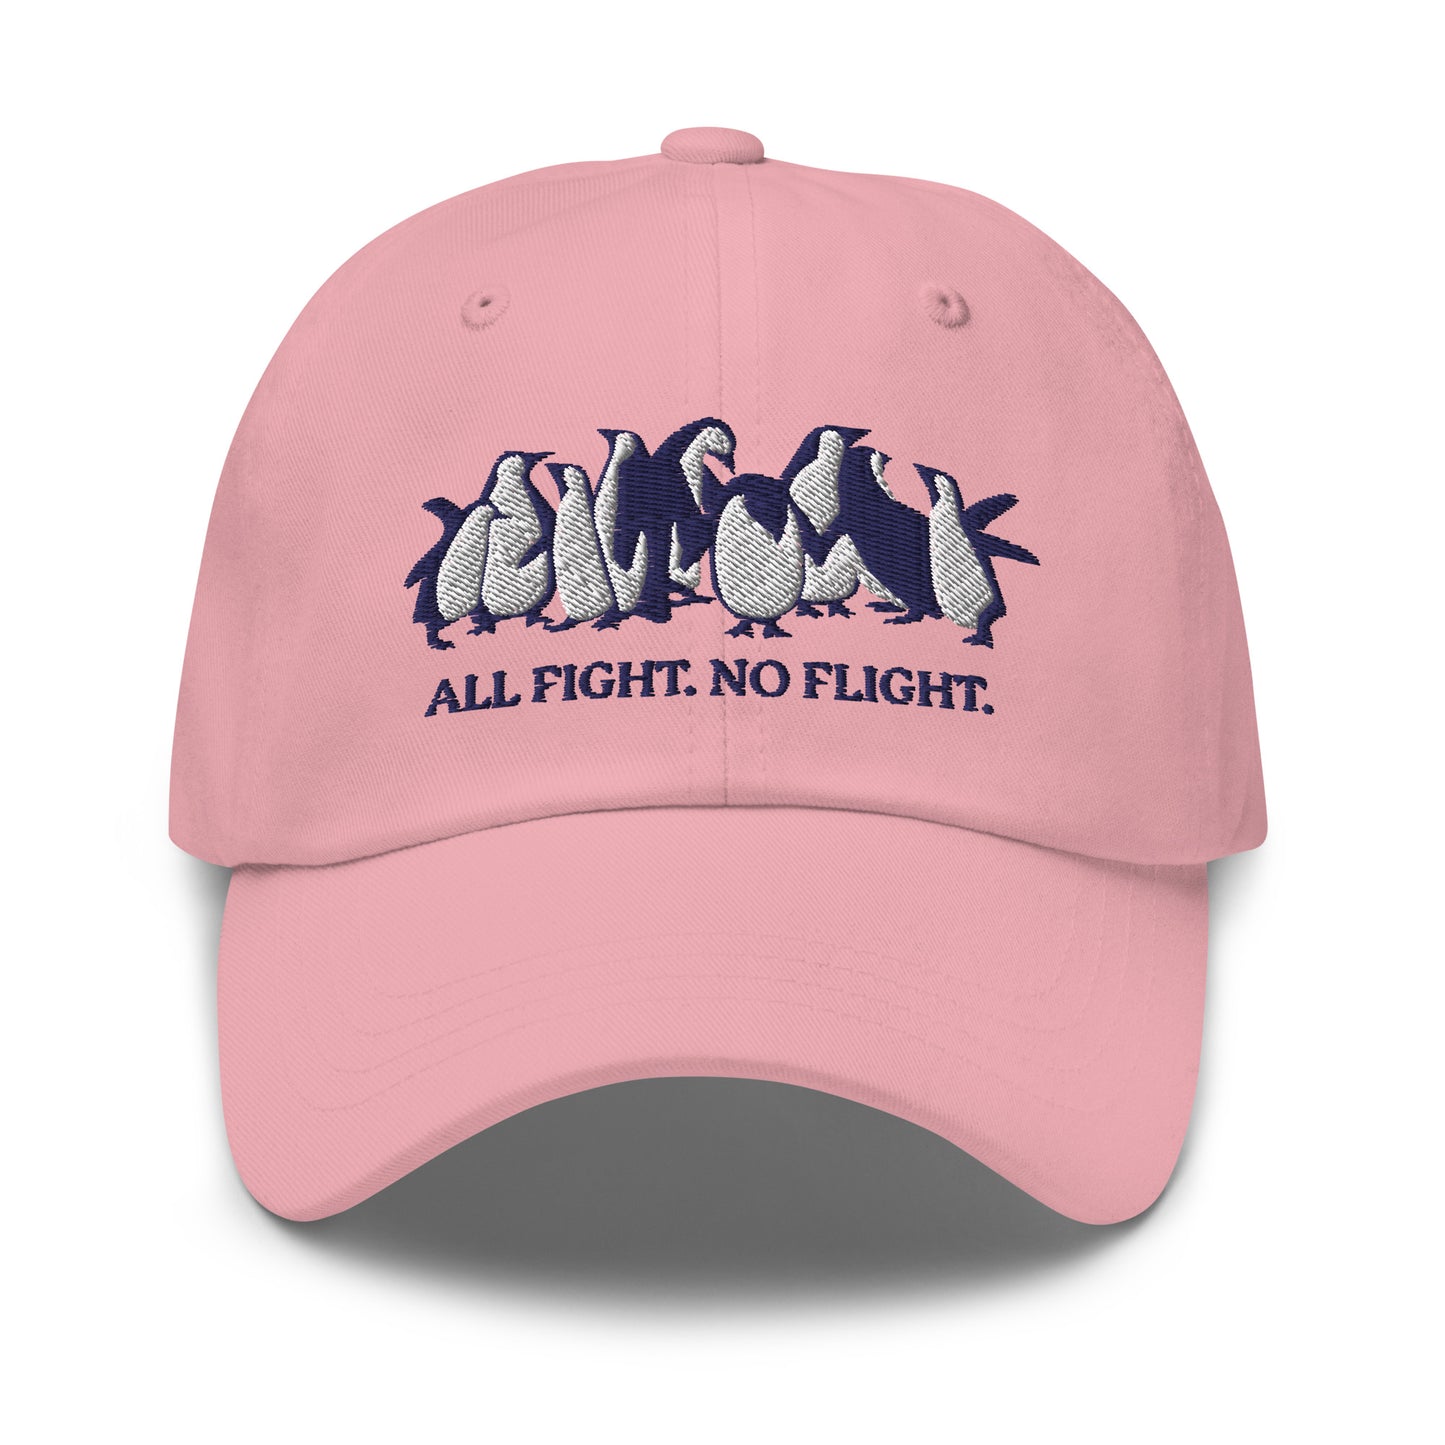 All Fight. No Fight. hat